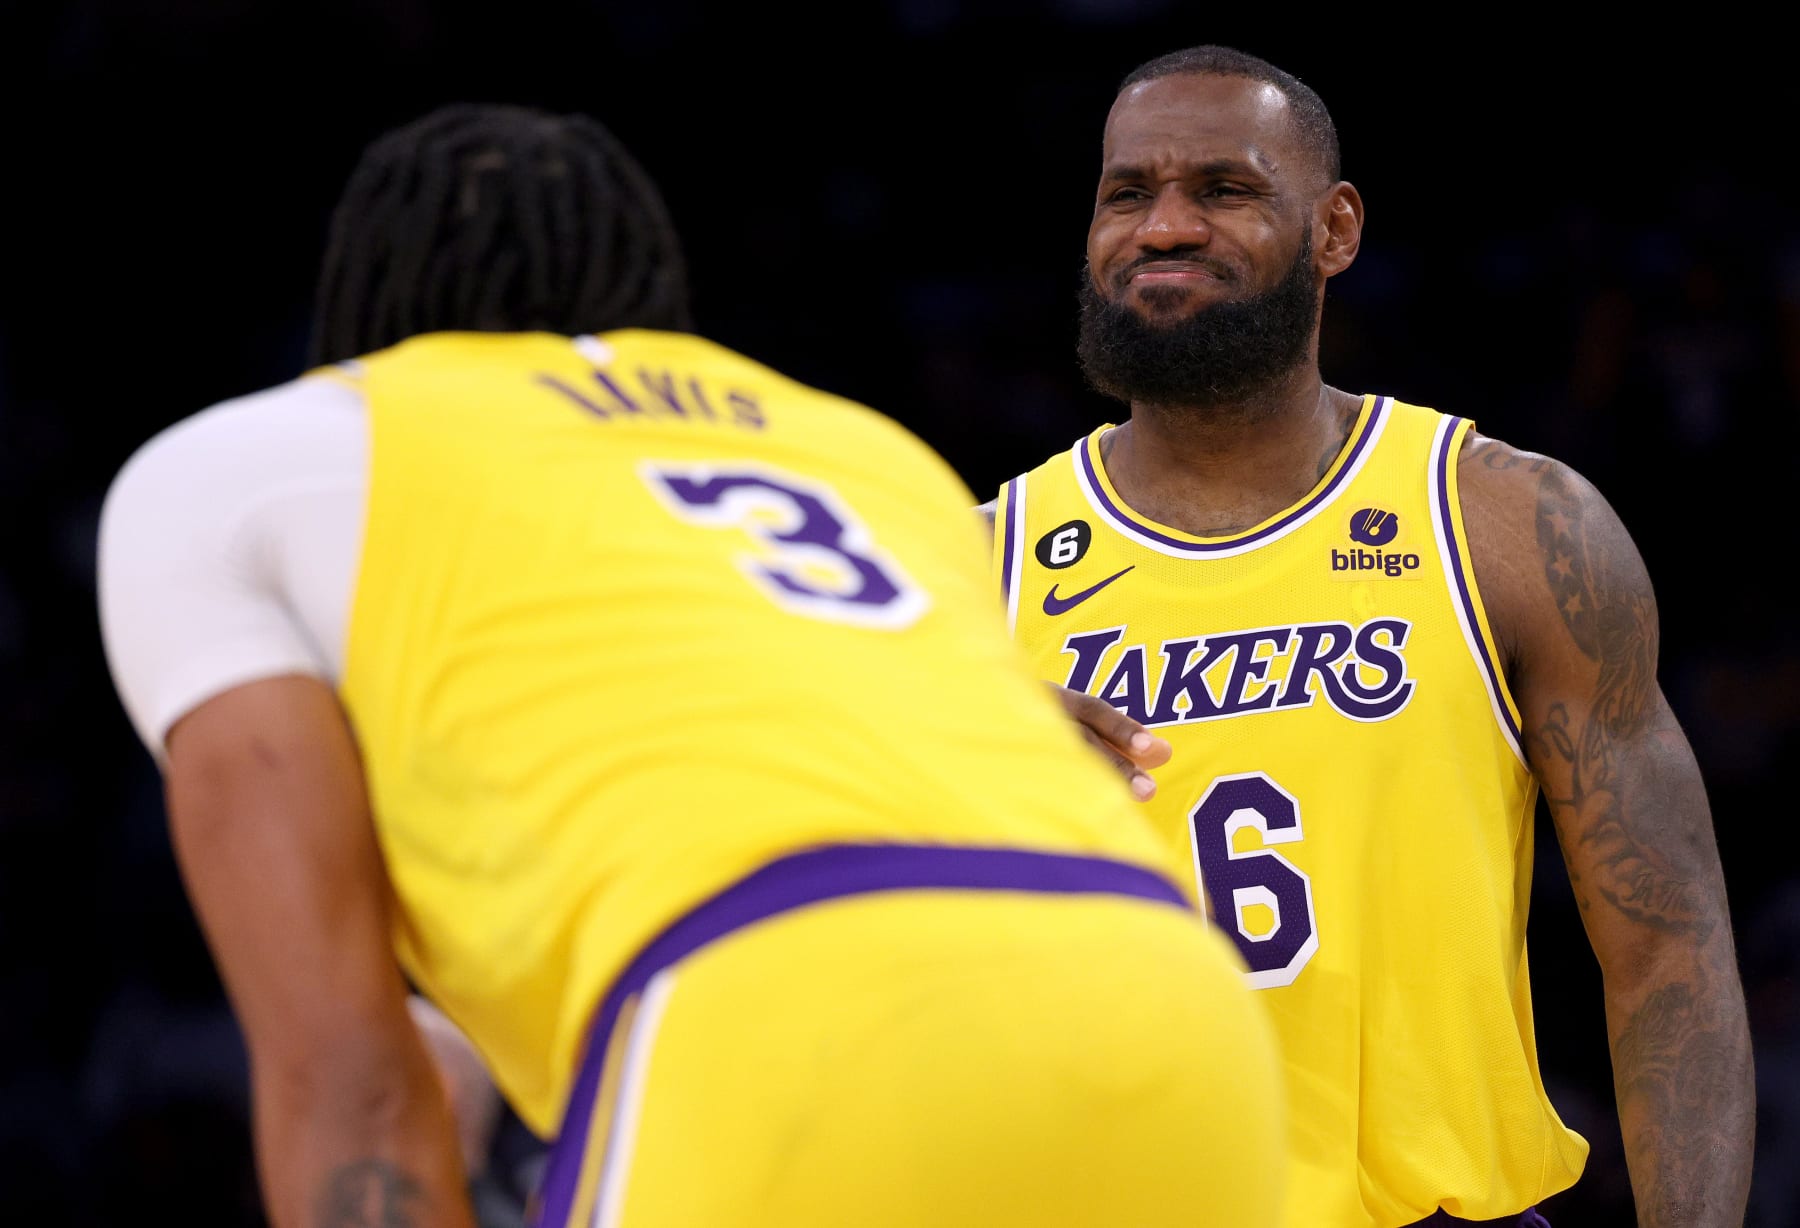 Report: LeBron's plan to give Davis No. 23 with Lakers postponed